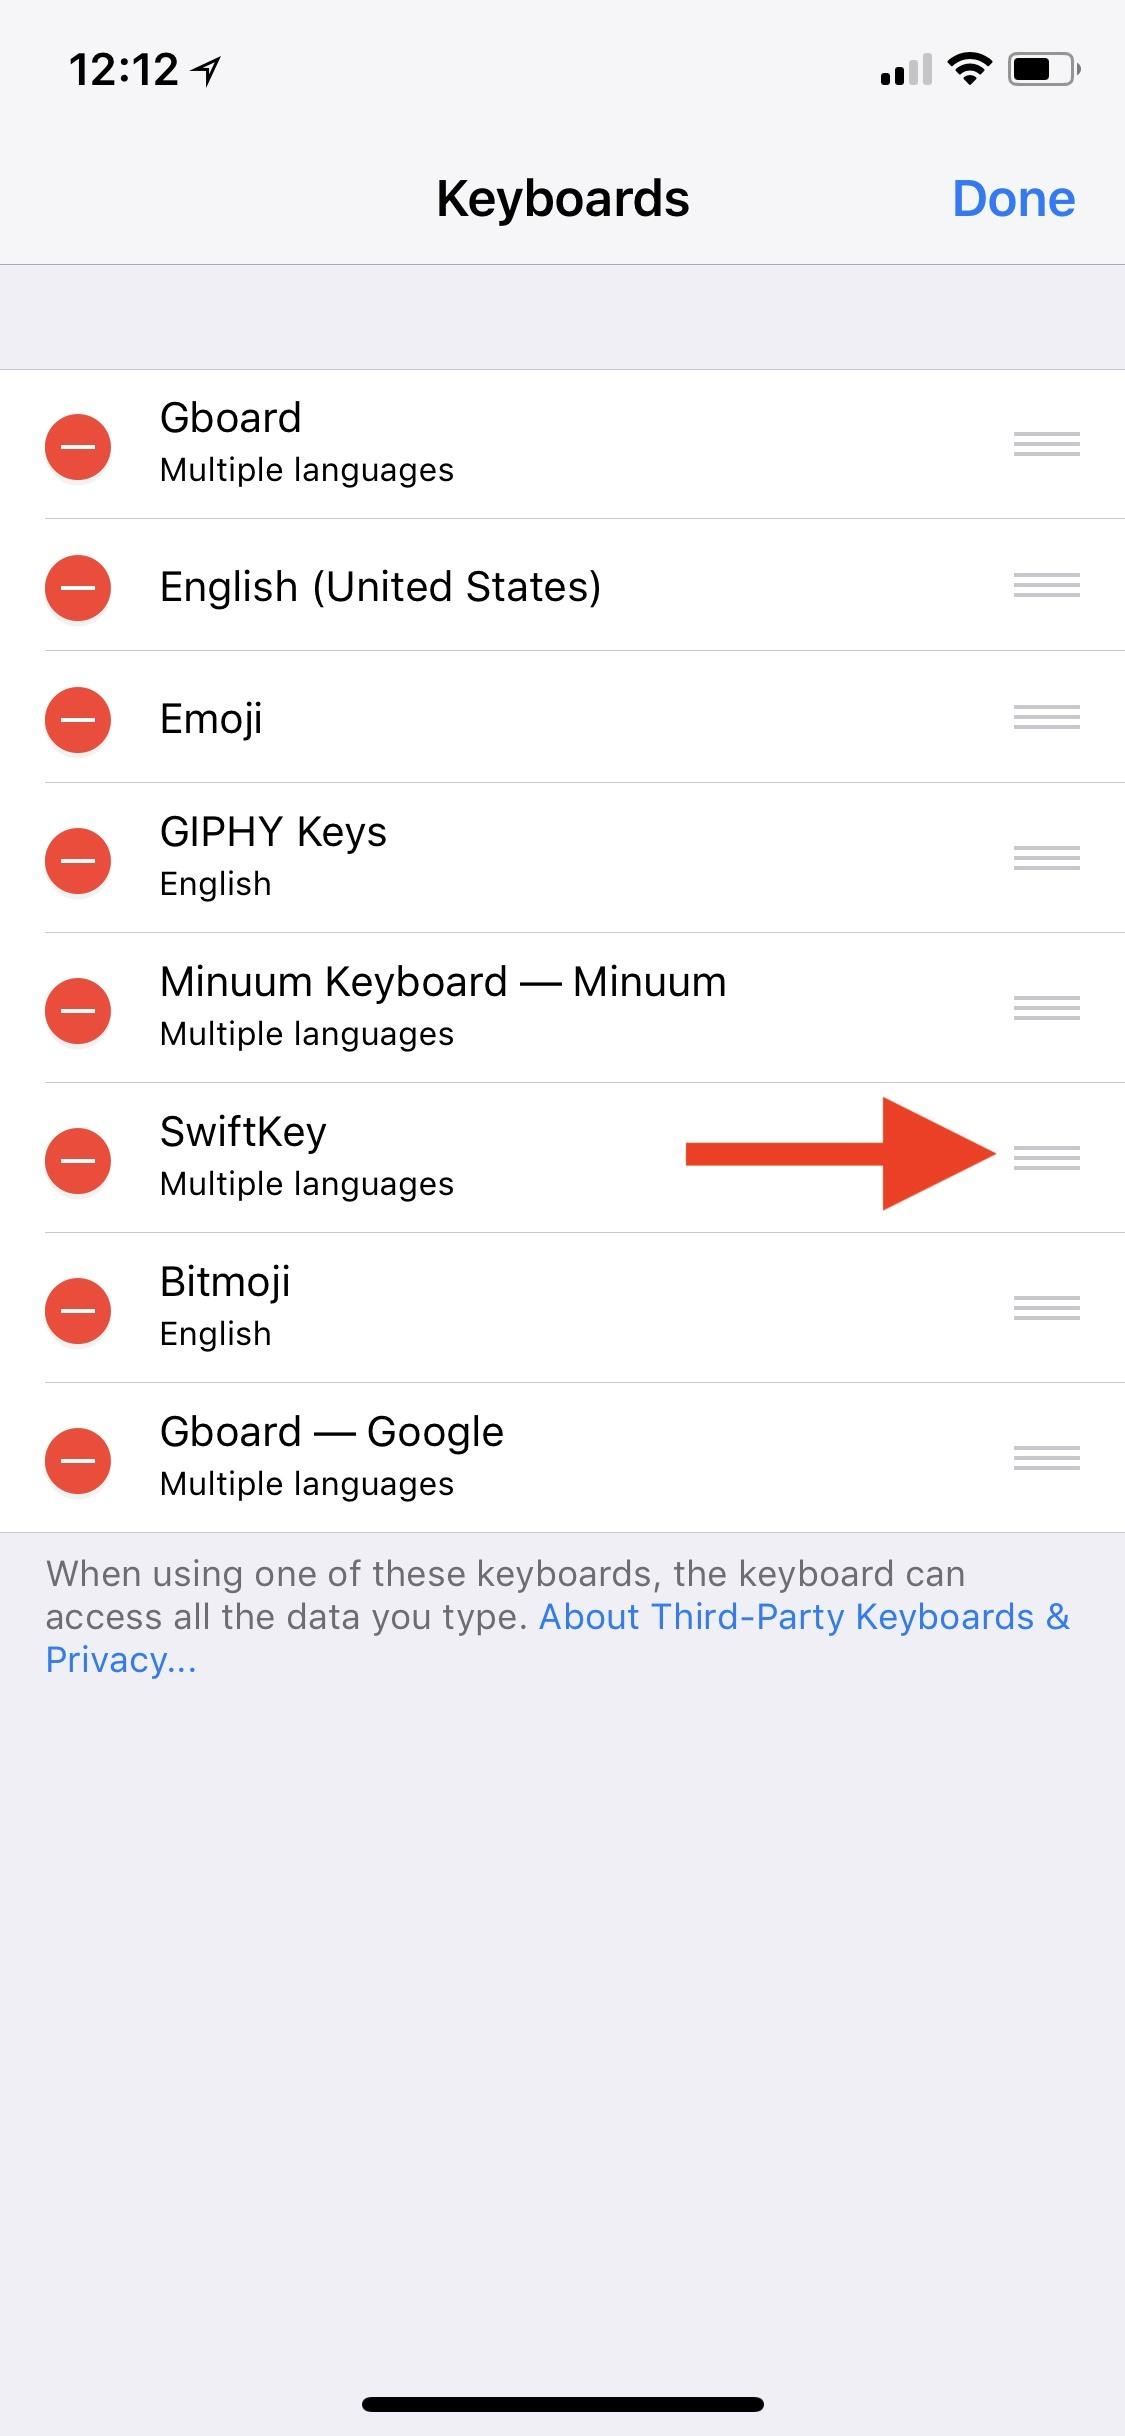 How to Add, Switch, Reorder & Delete Keyboards on Your iPhone